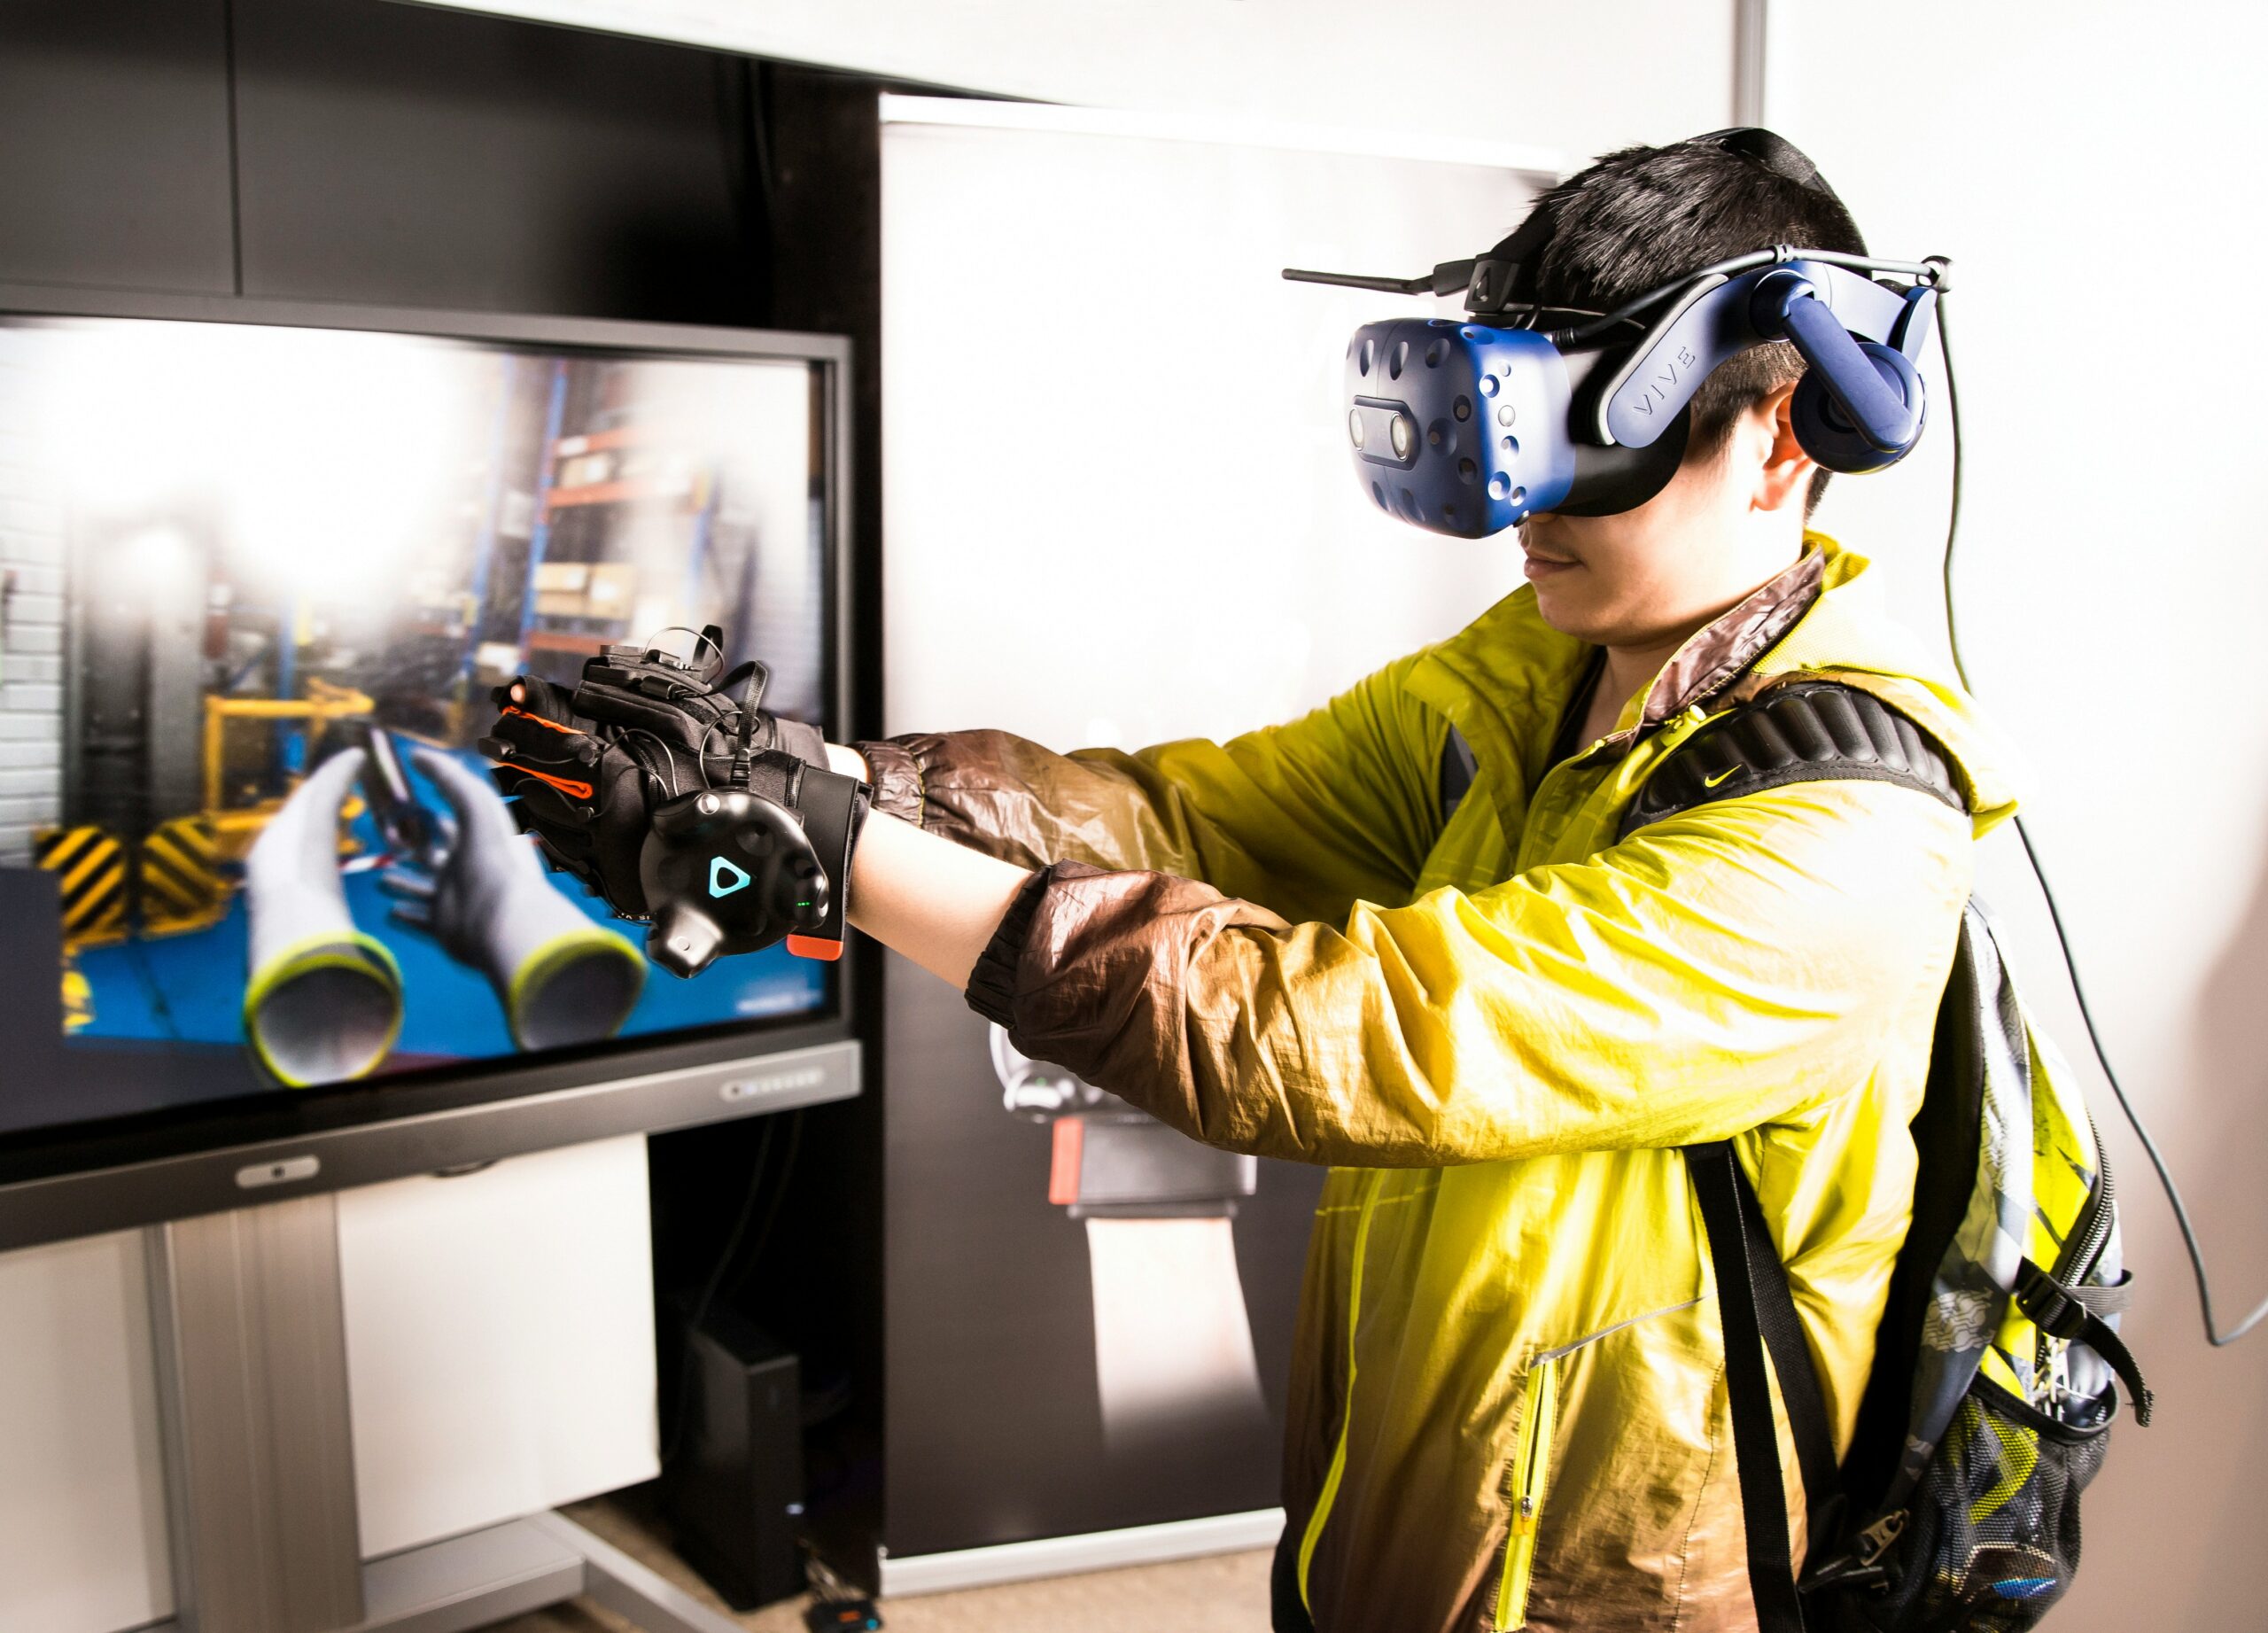 An individual in a yellow jacket holds a virtual reality headset, ready to immerse himself in a virtual career training.